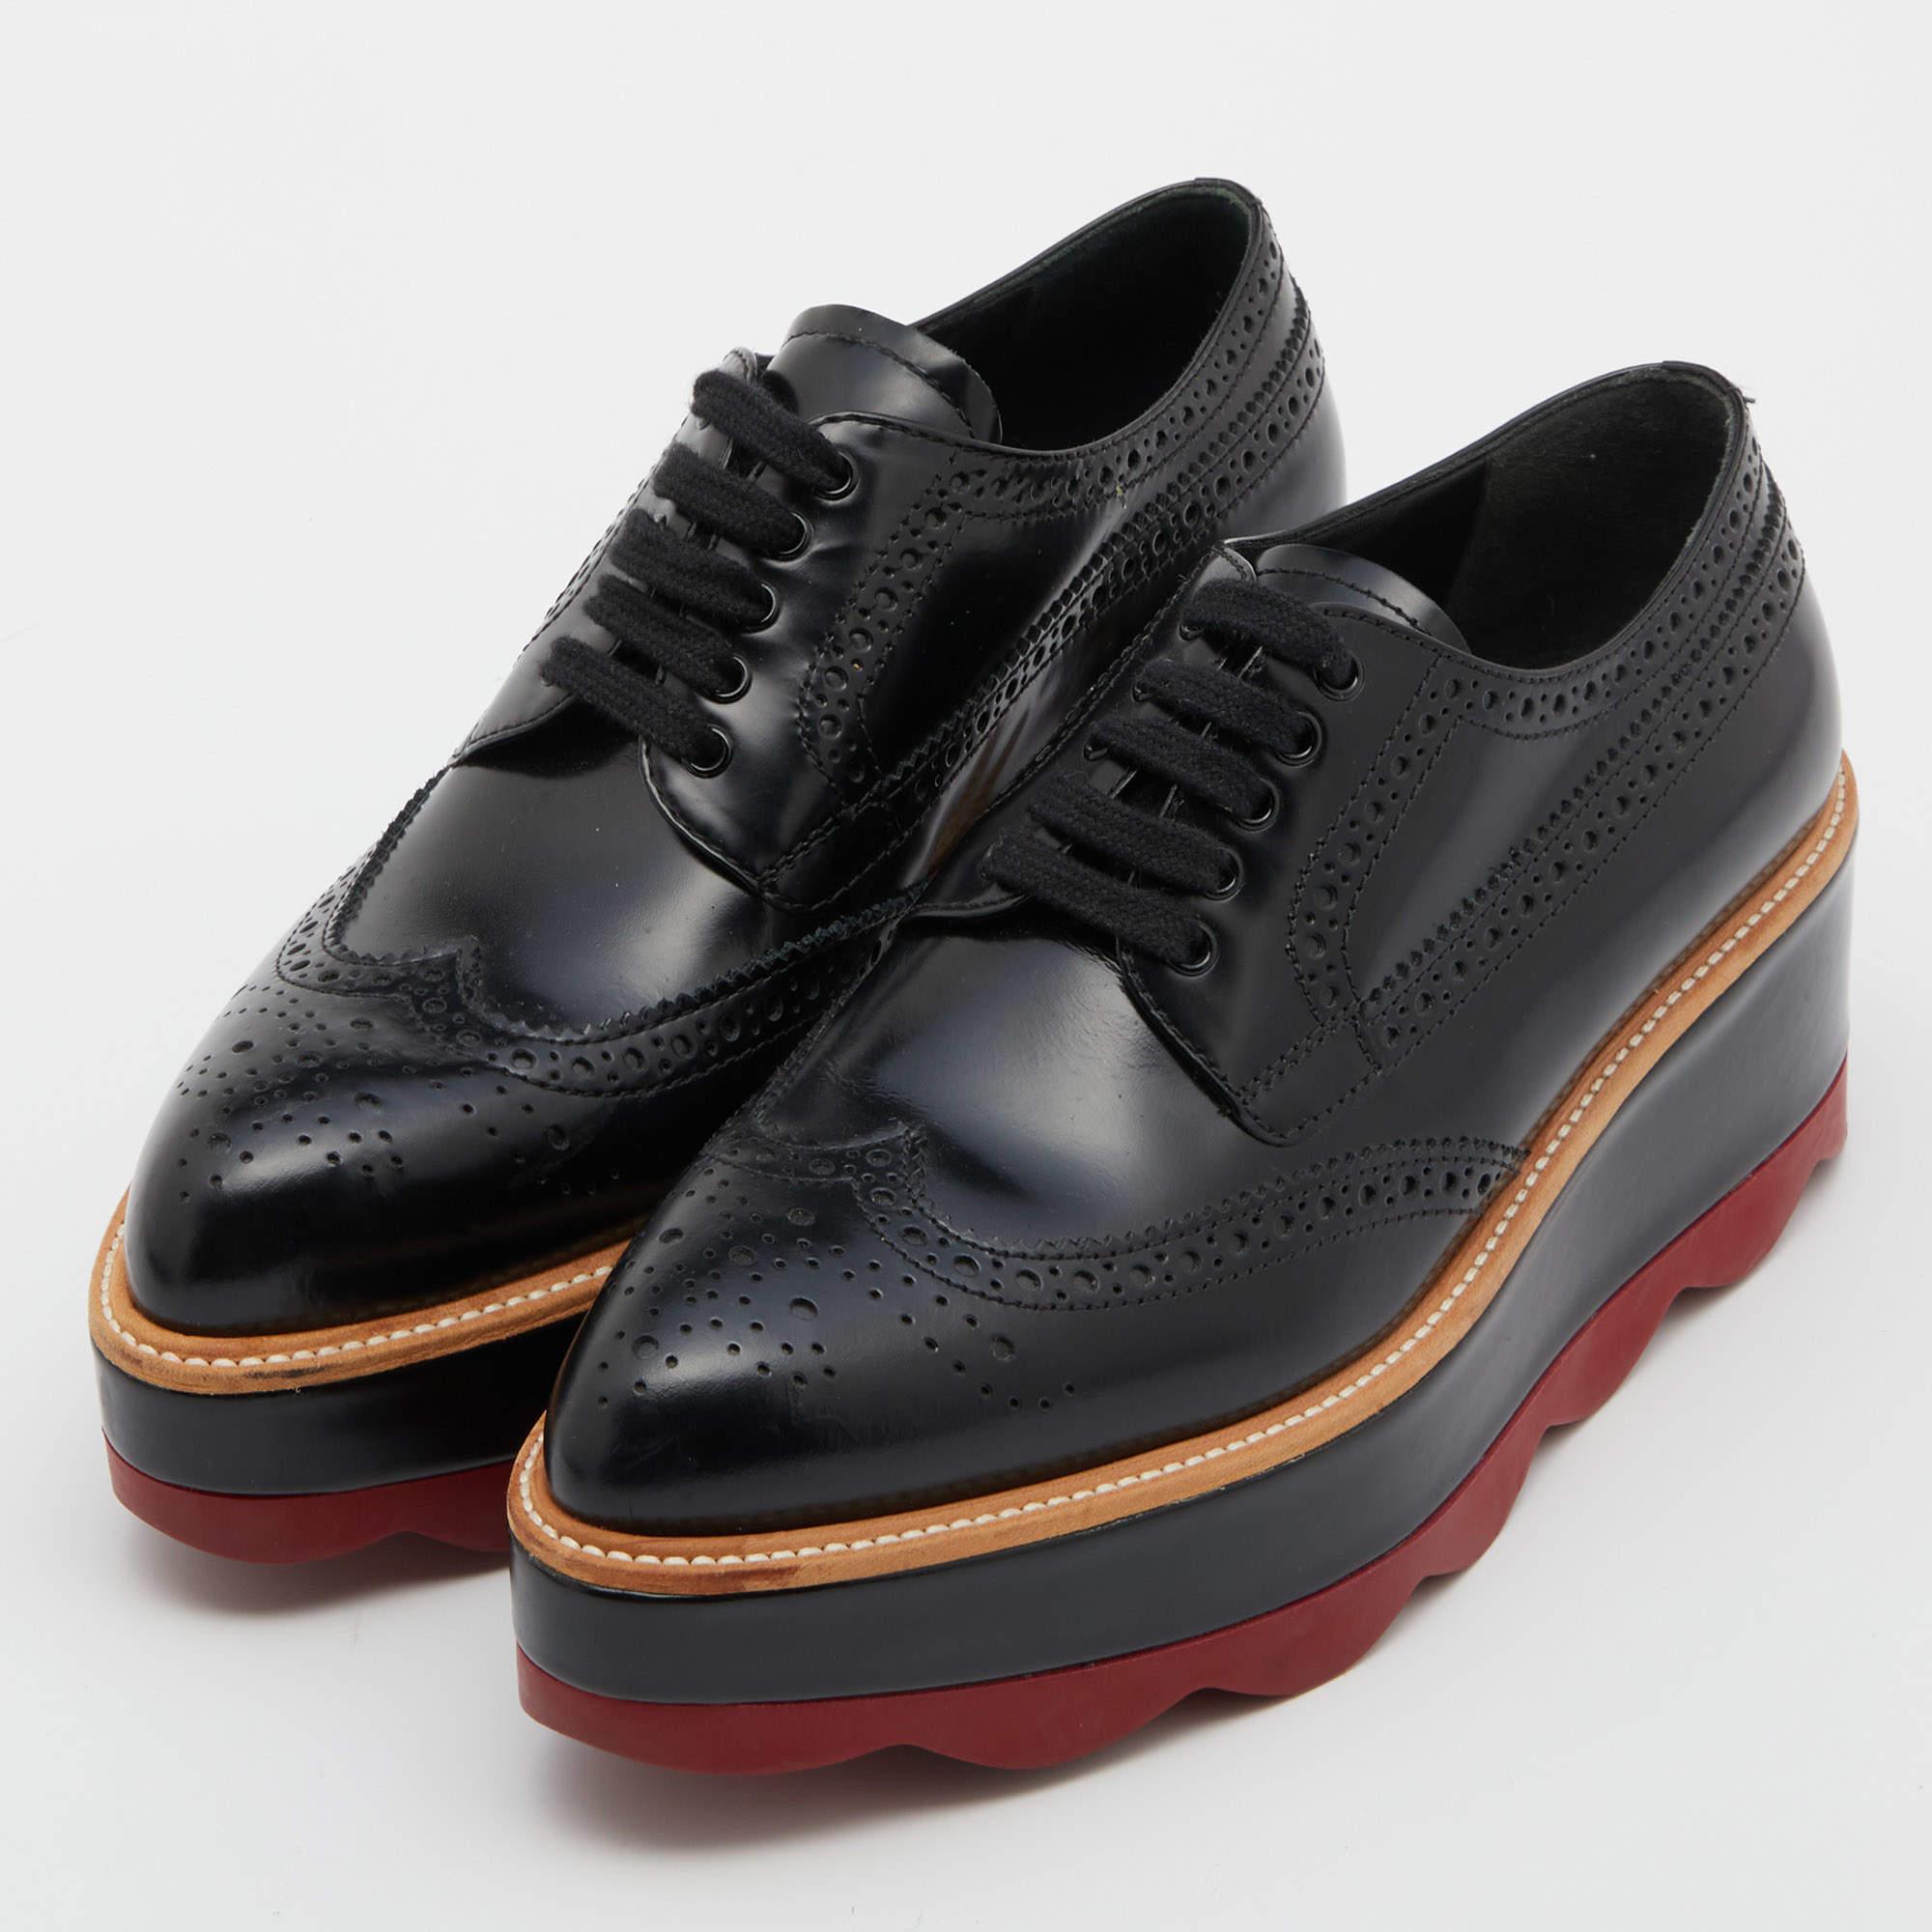 How can one not be in awe by just looking at this luxe pair from Prada! The brogue leather Derbies are well-crafted and they are beautified with lace-ups and wingtip detailing. Comfortable insoles and chunky platforms complete this must-have pair!

